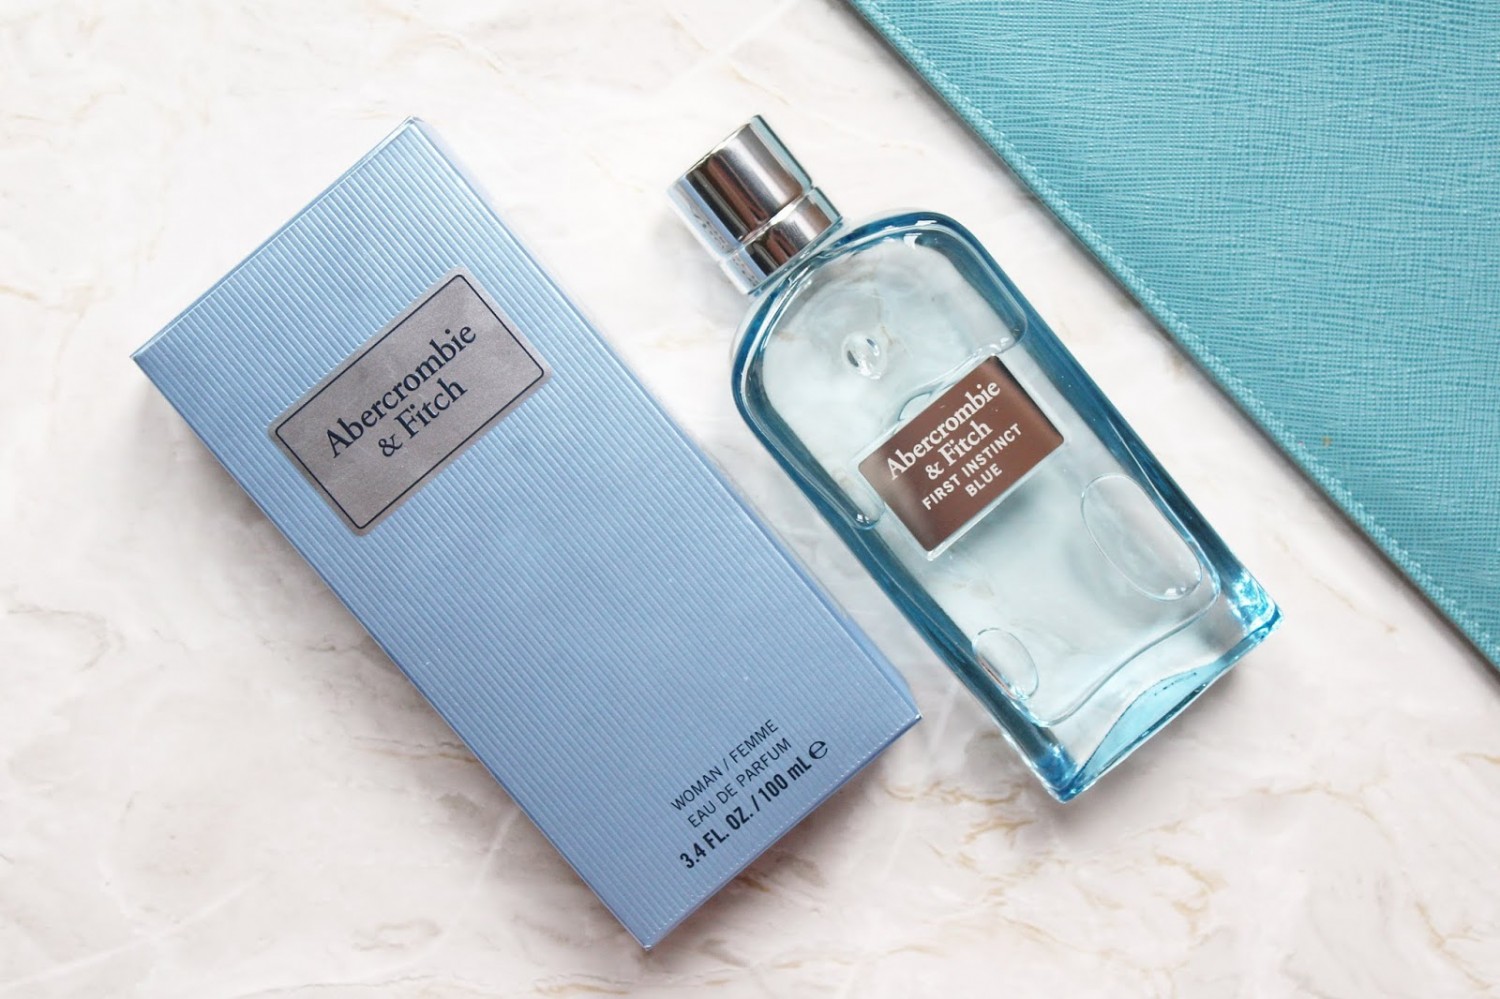 abercrombie & fitch first instinct blue for her